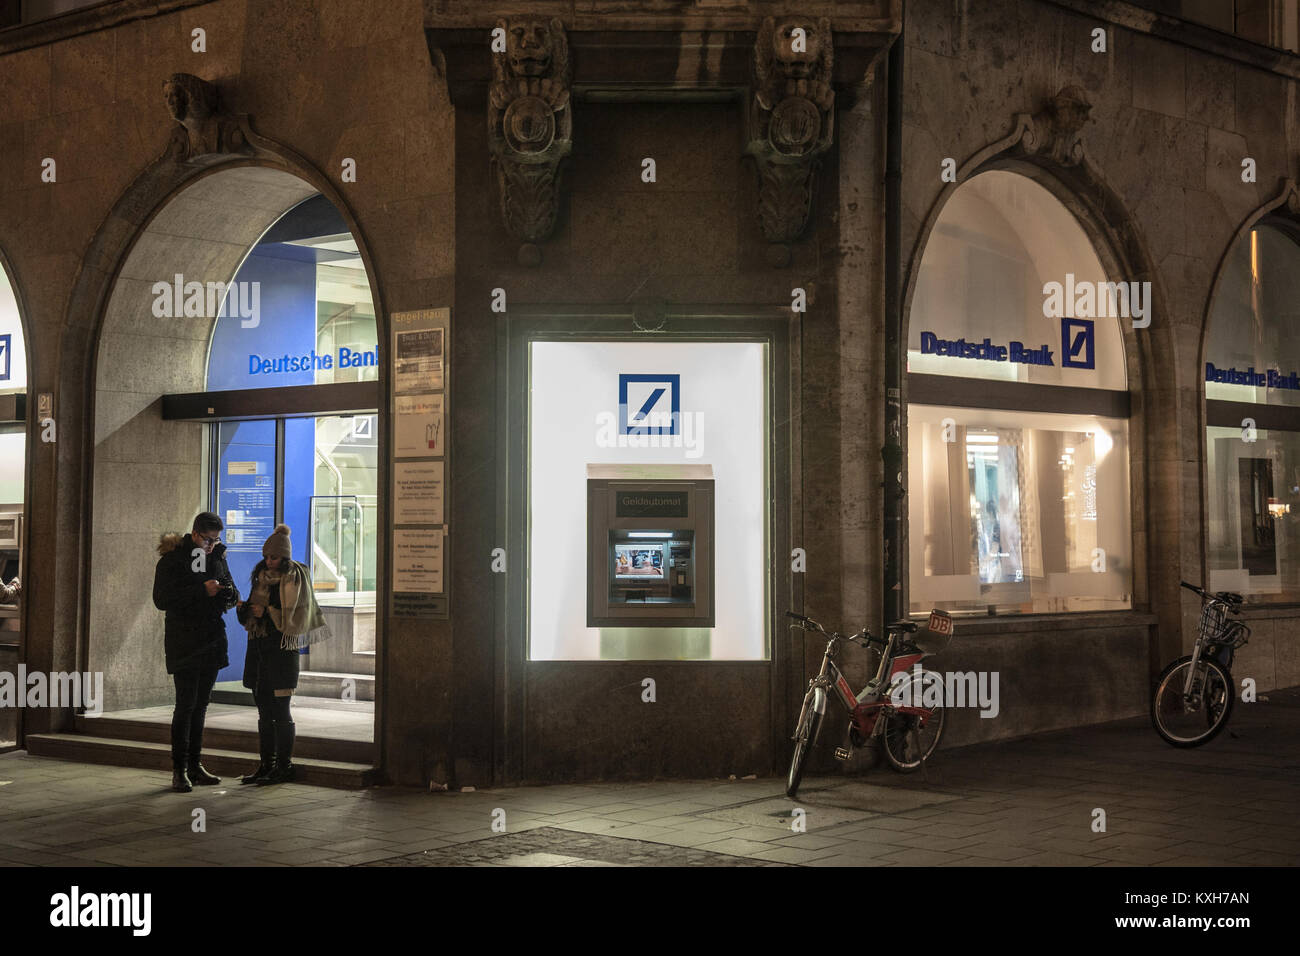 MUNICH, GERMANY - DECEMBER 17, 2017: Deutsche Bank logo and ATM on one of their Munich branches taken during a snowy night. Deutsche Bank is one of th Stock Photo